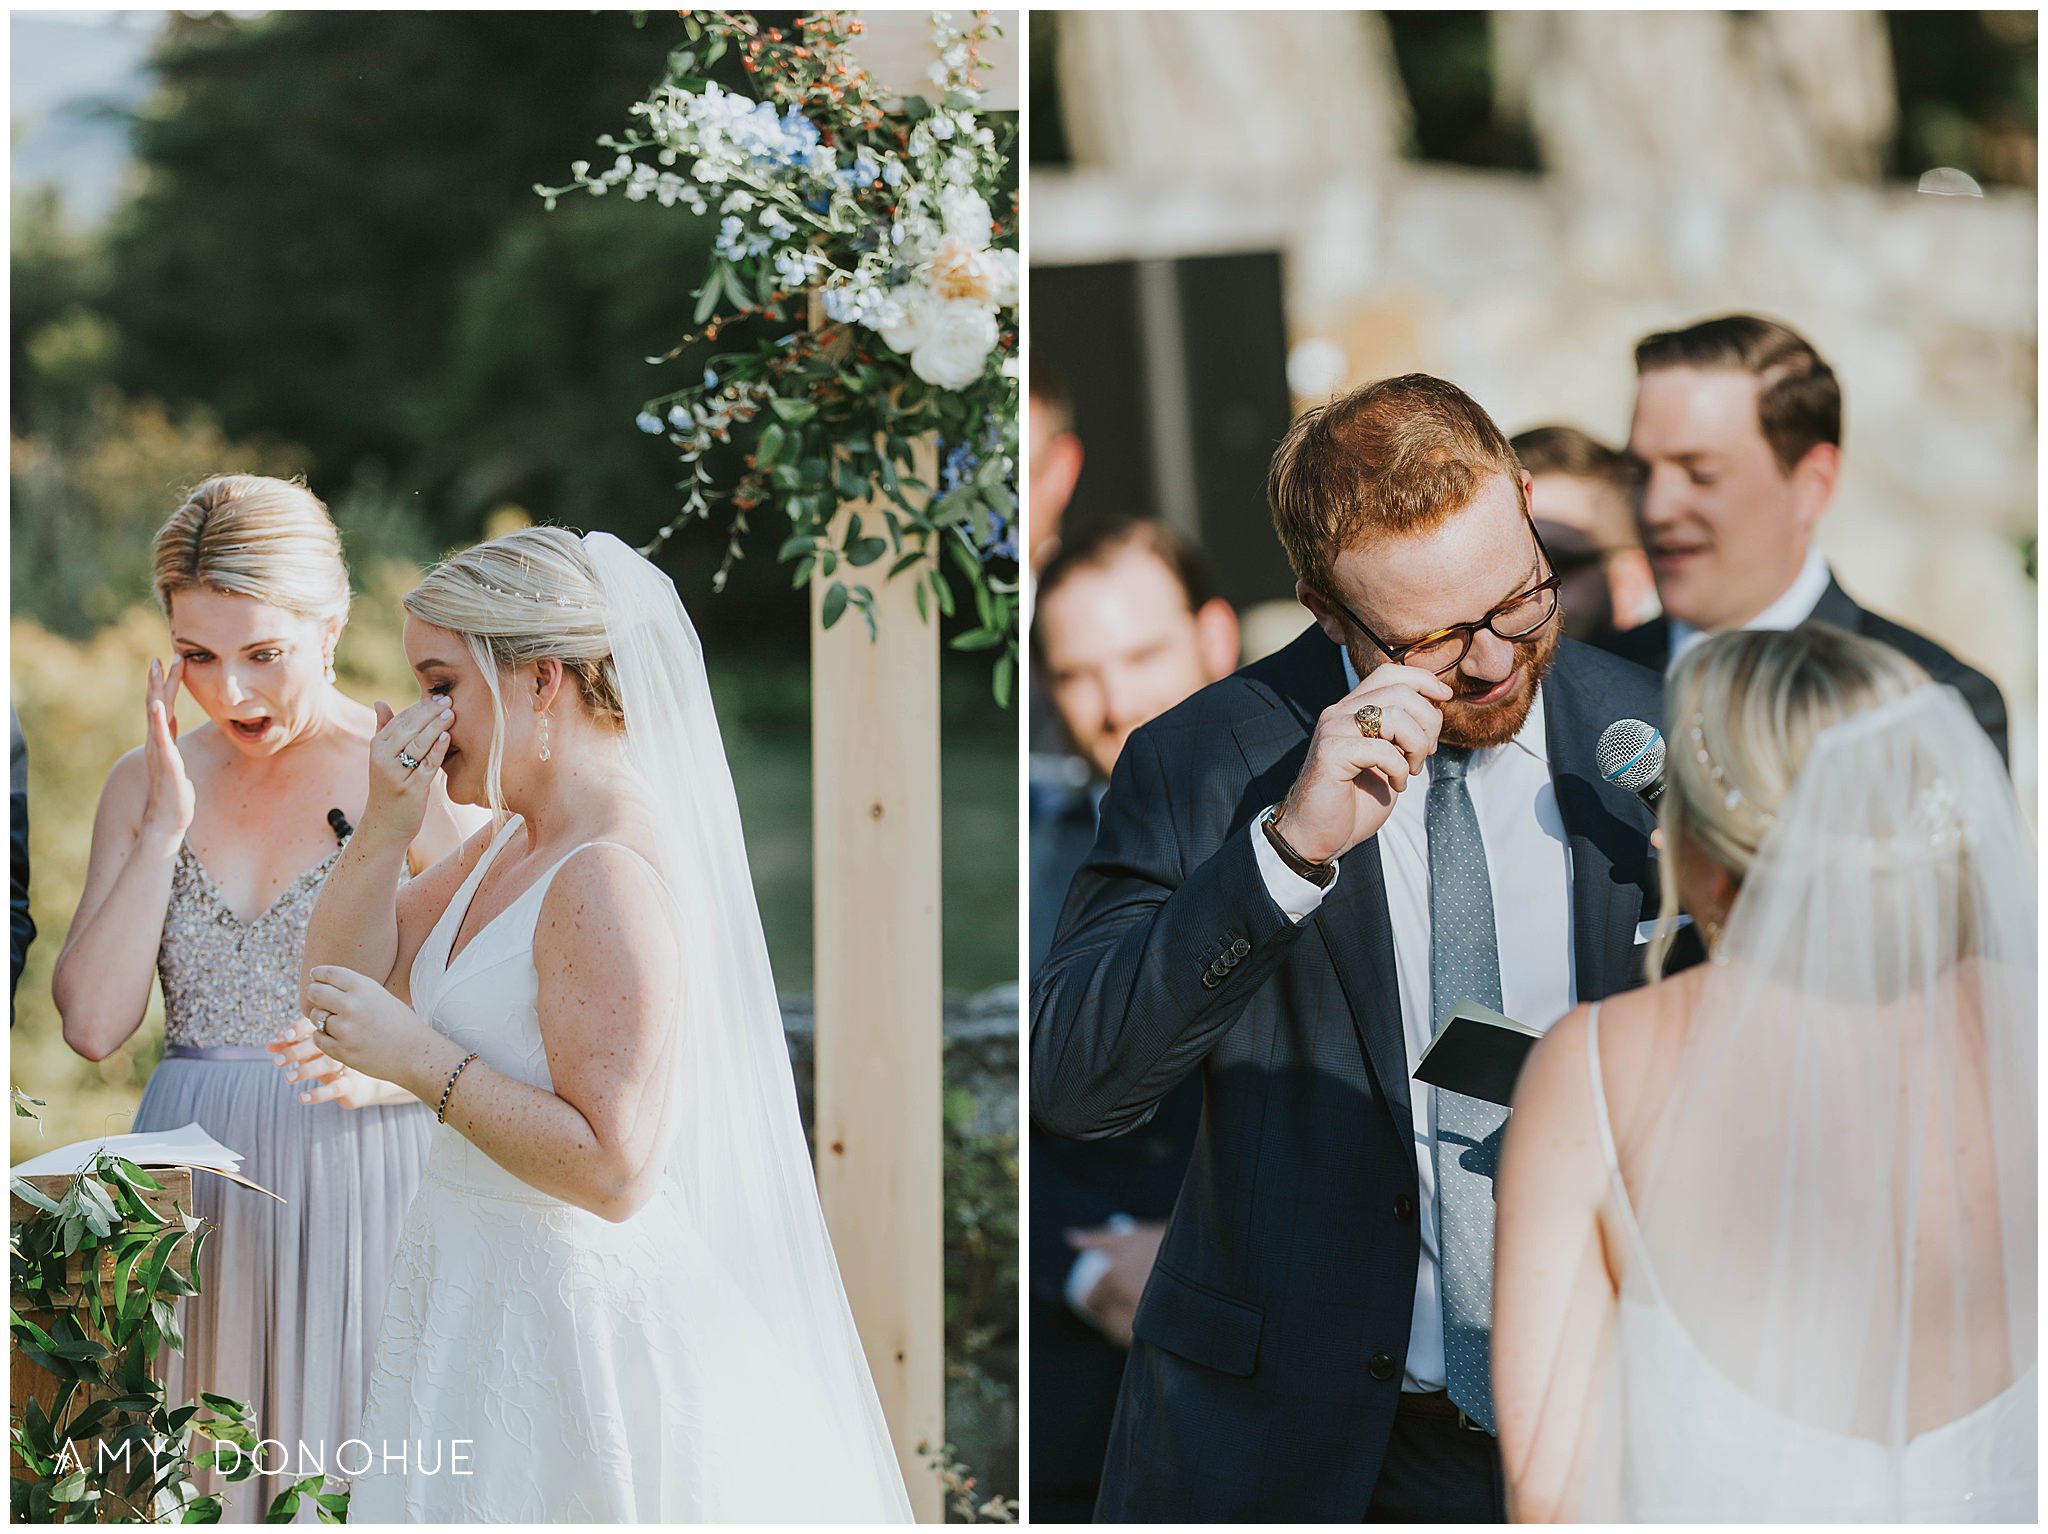 Ceremony | The Fells Estate | The Prism House Event Design & Wedding Planning | New Hampshire Wedding Photographer | © Amy Donohue Photography